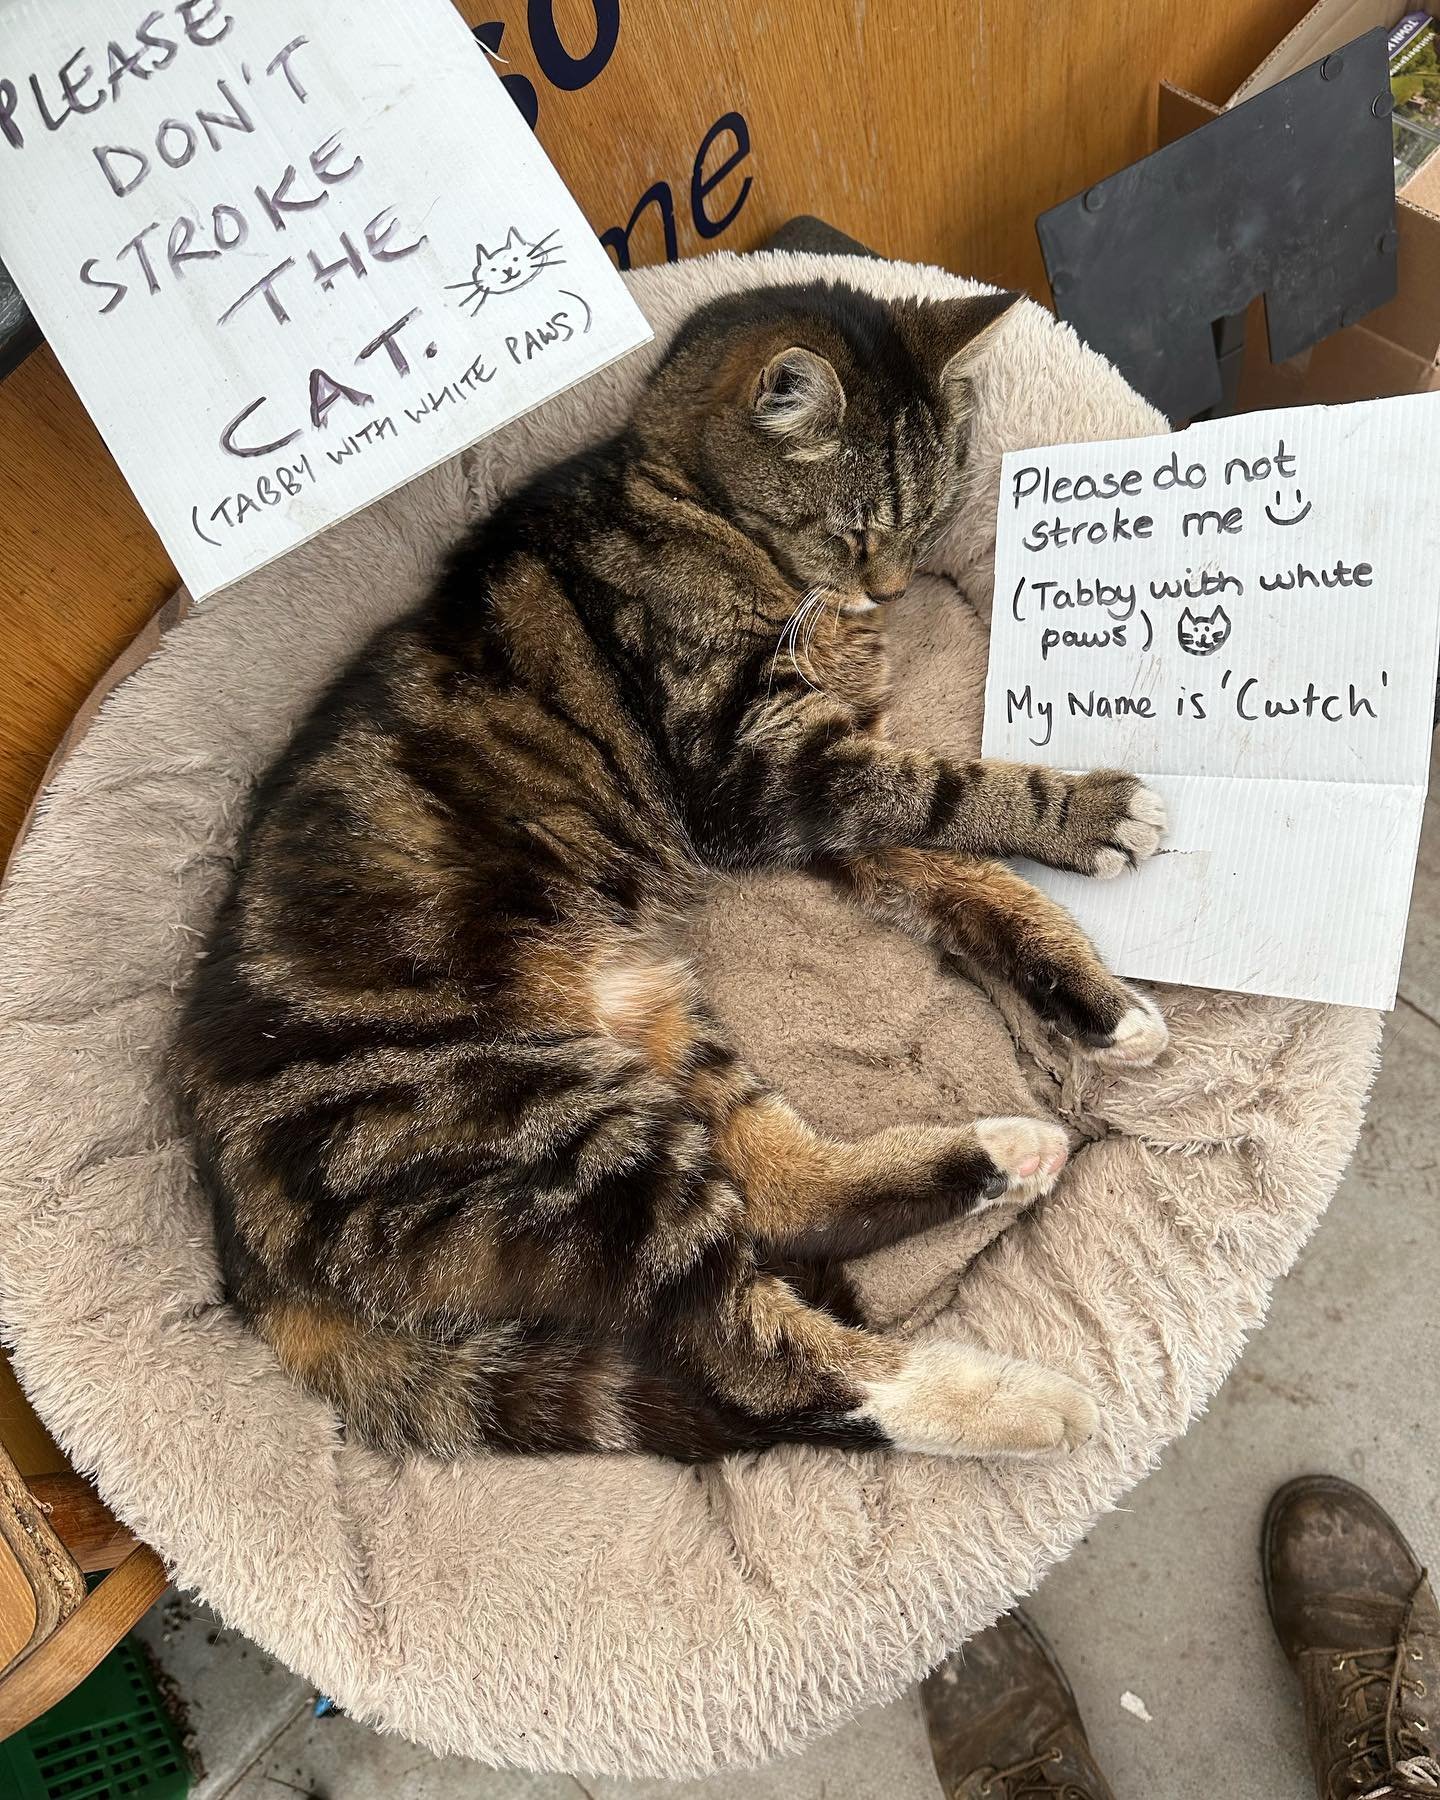 You have been warned&hellip;. Cwtch the cat is not to be messed with 🤣

Did you know we had a bad review on google (1 star) around 7 years ago because she scrammed someone who touched her 🤣